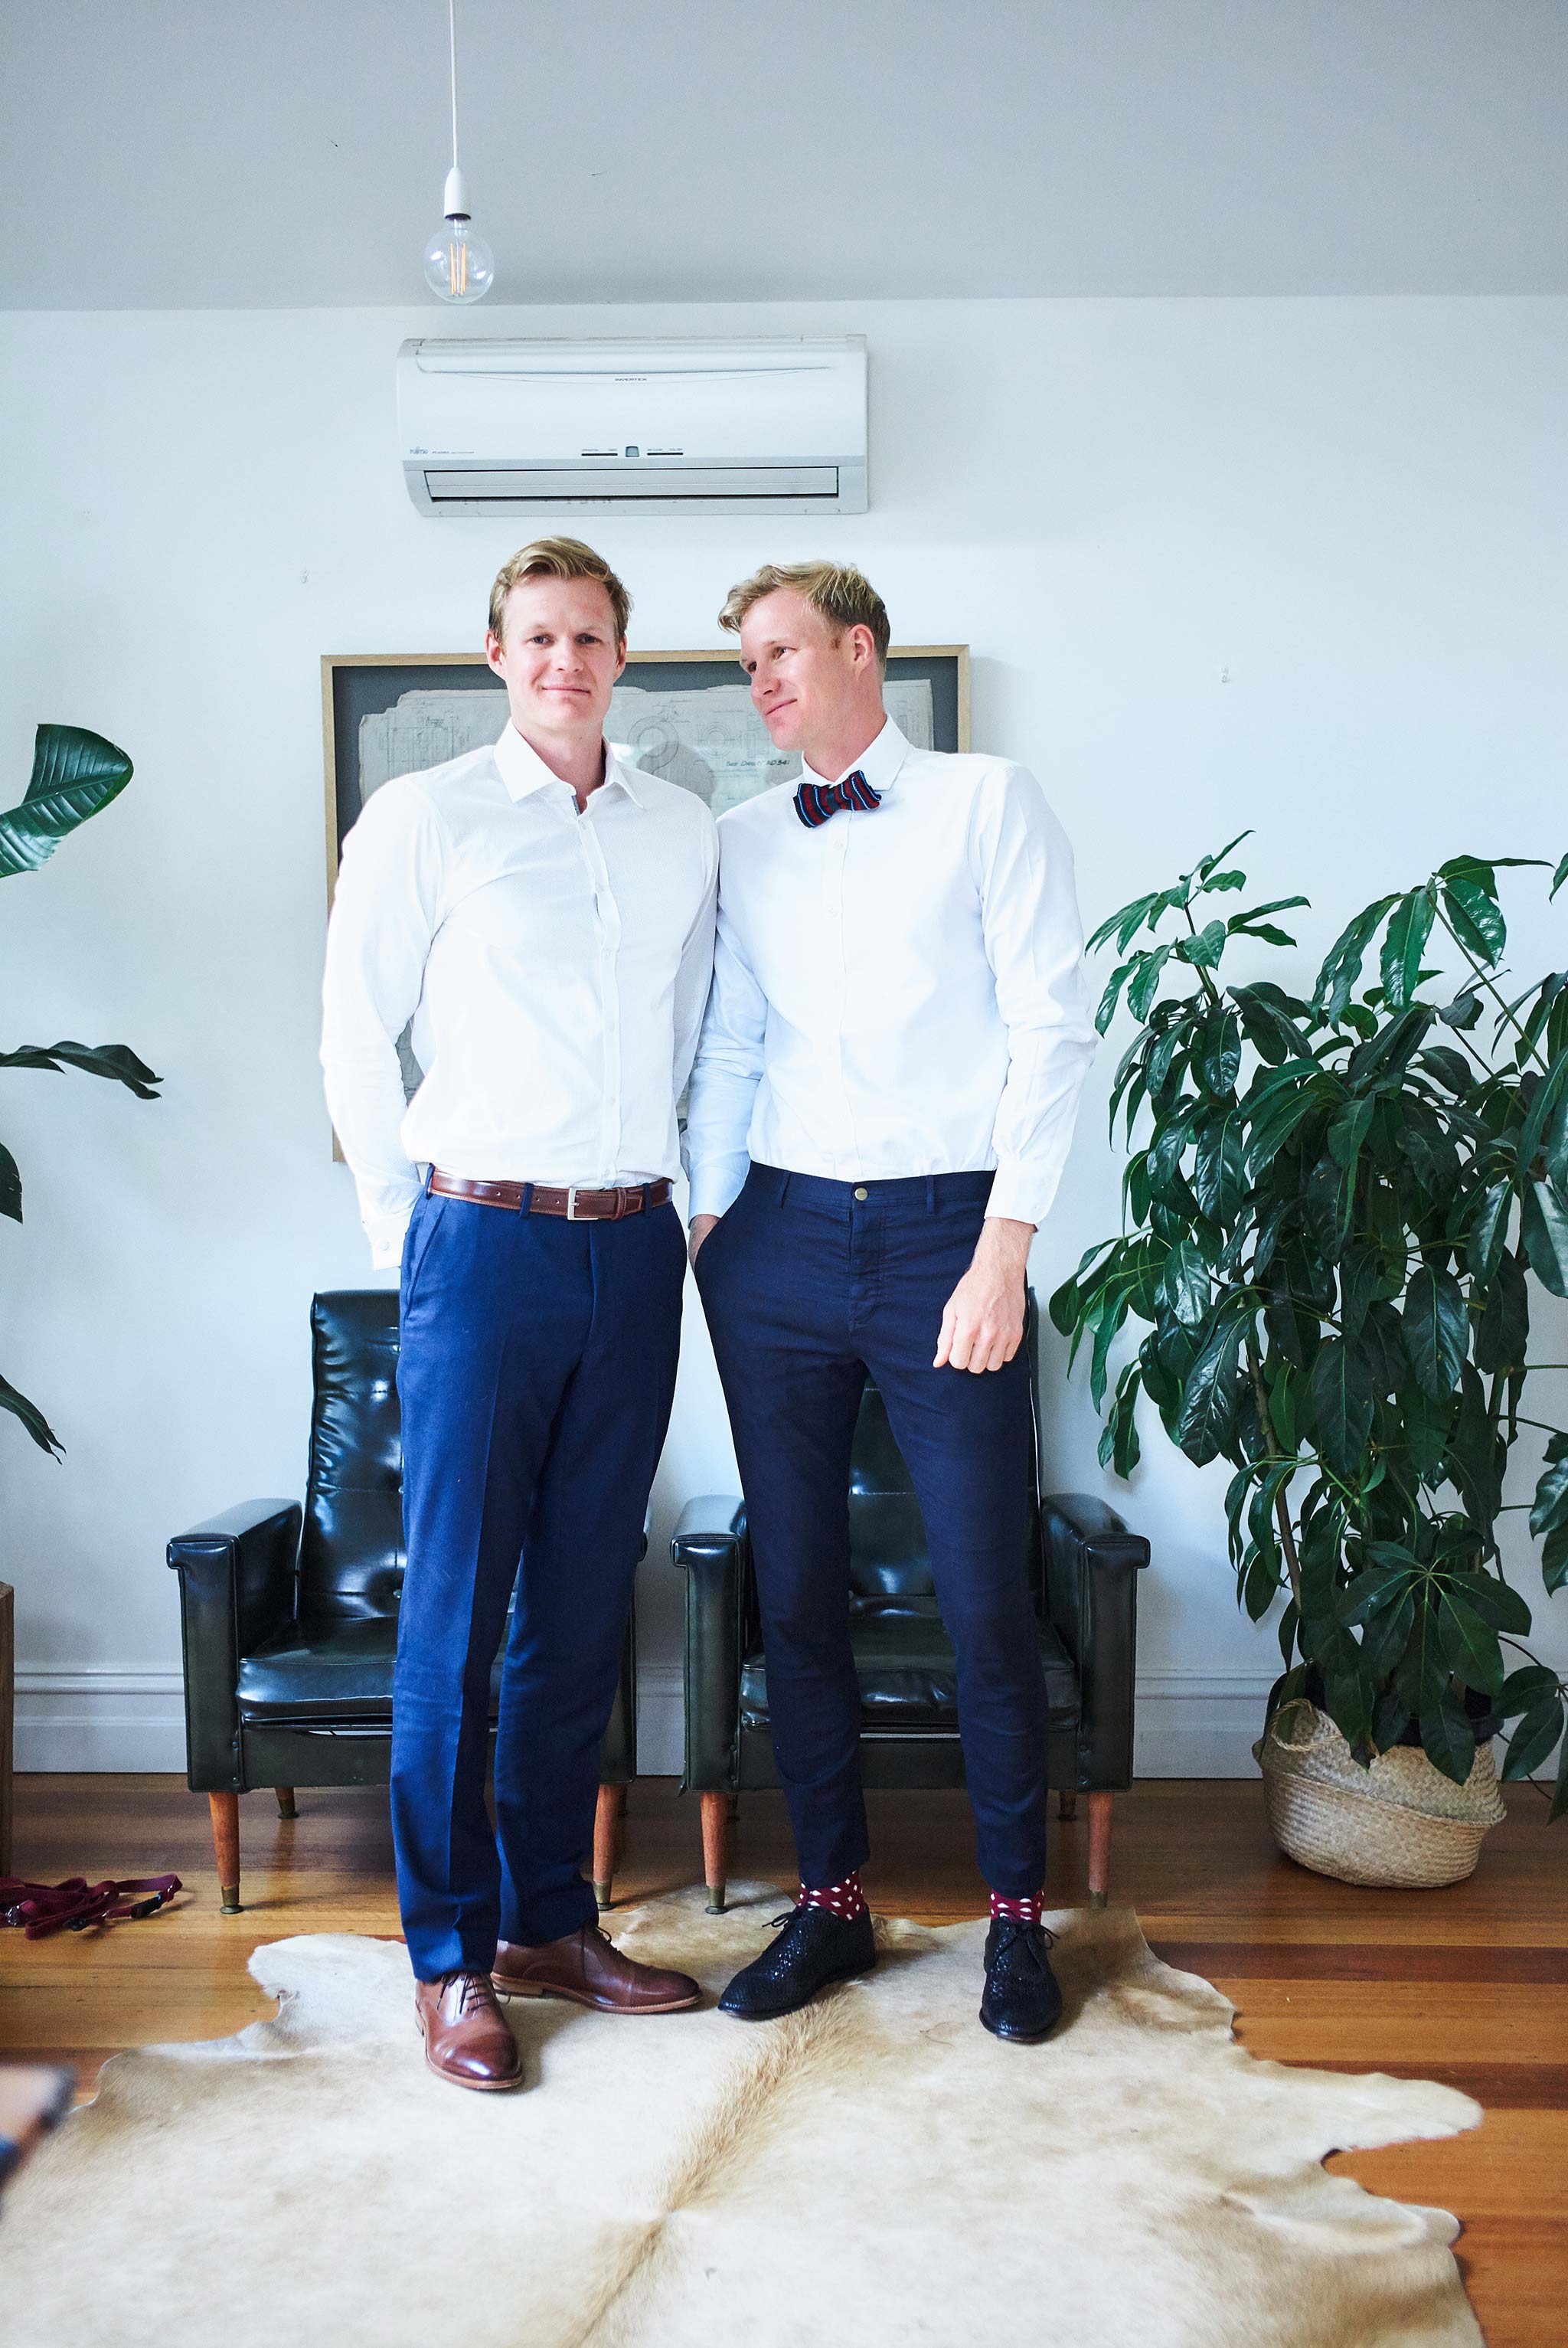 Melbourne-Fitzroy-Surprise-Winter-Wedding-photographer-getting-ready-first-look-groom-best-man-twin